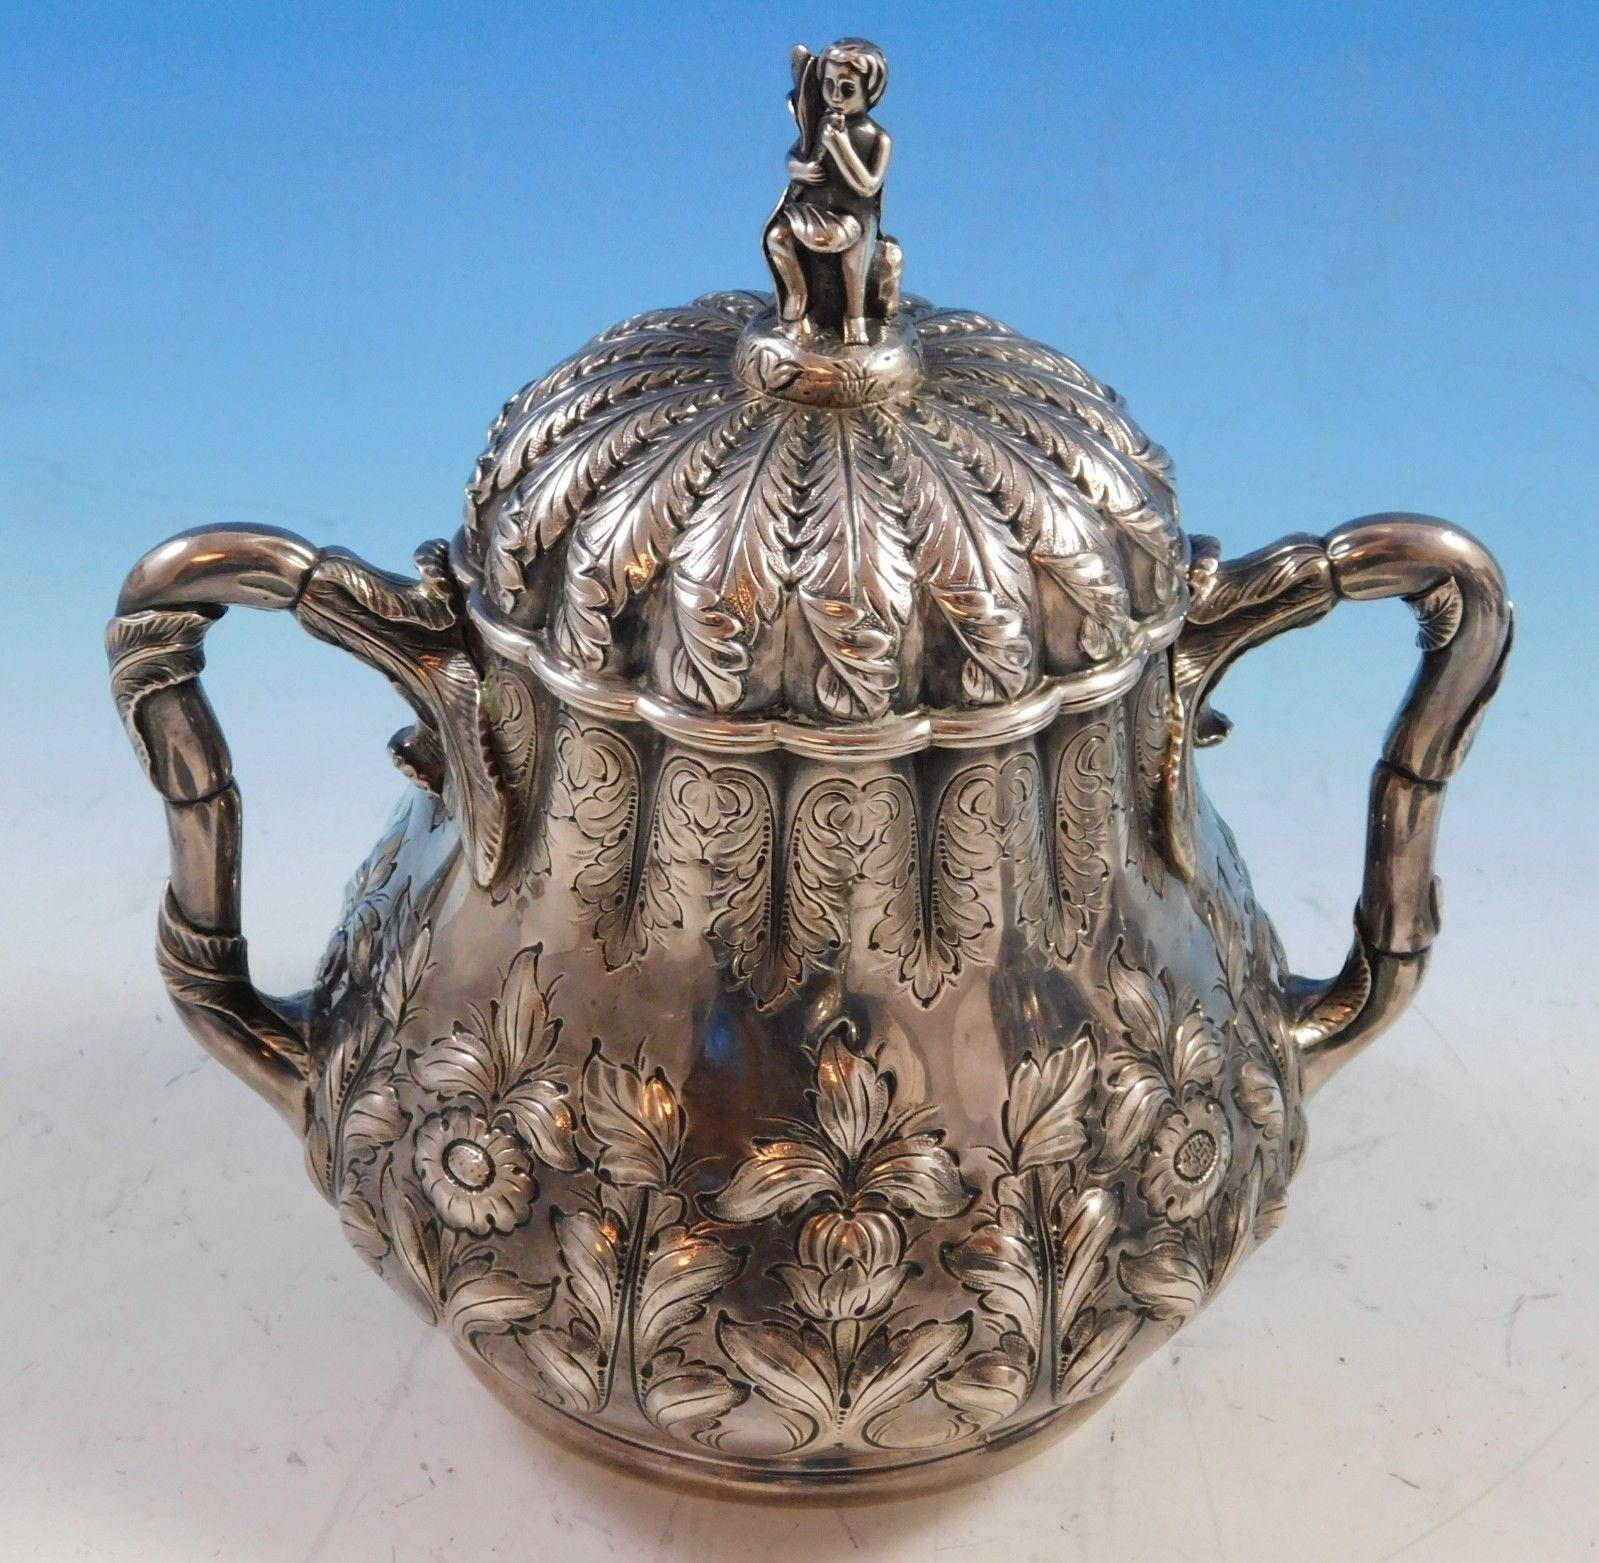 American George Sharp Sterling Silver Tea Set 4 Pc with 3-D Cast Japanese Finials  #2264